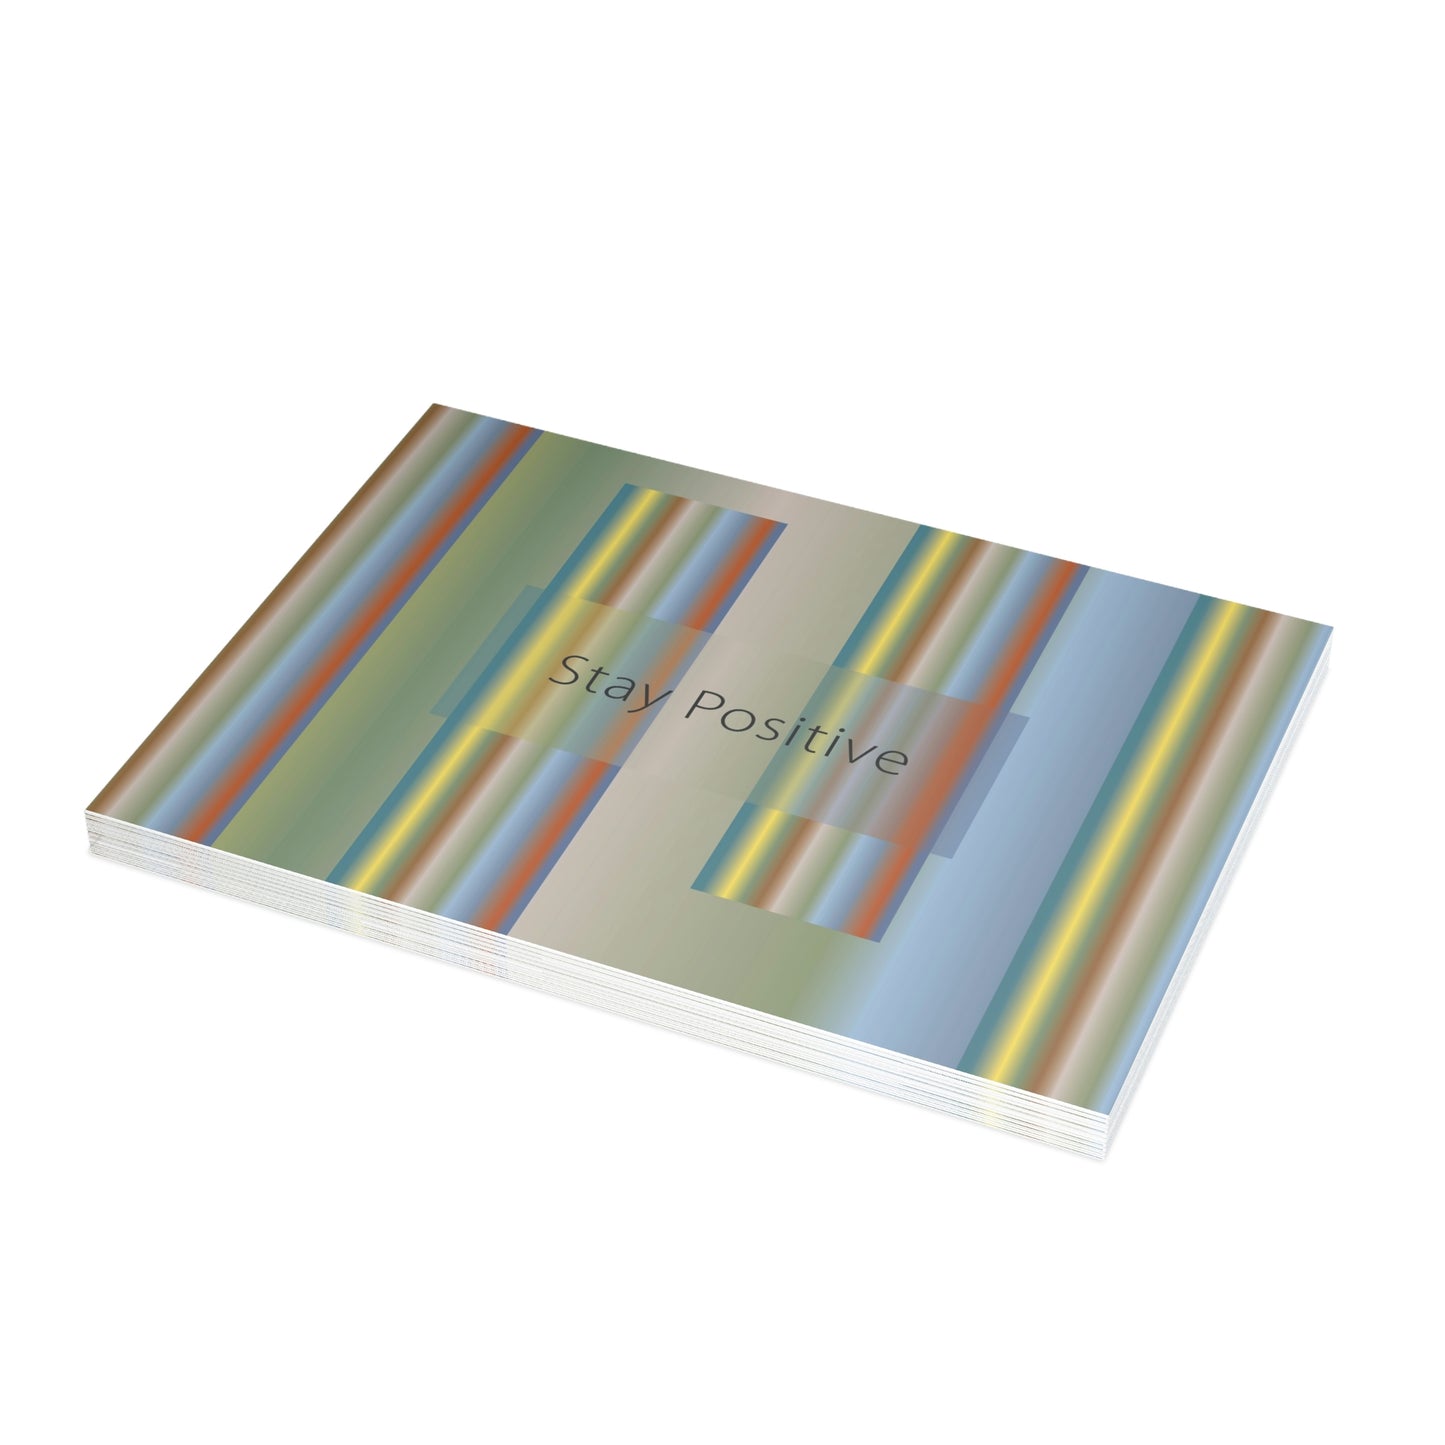 Unfolded Greeting Cards Horizontal (10, 30, and 50pcs) Stay Positive - Design No.200